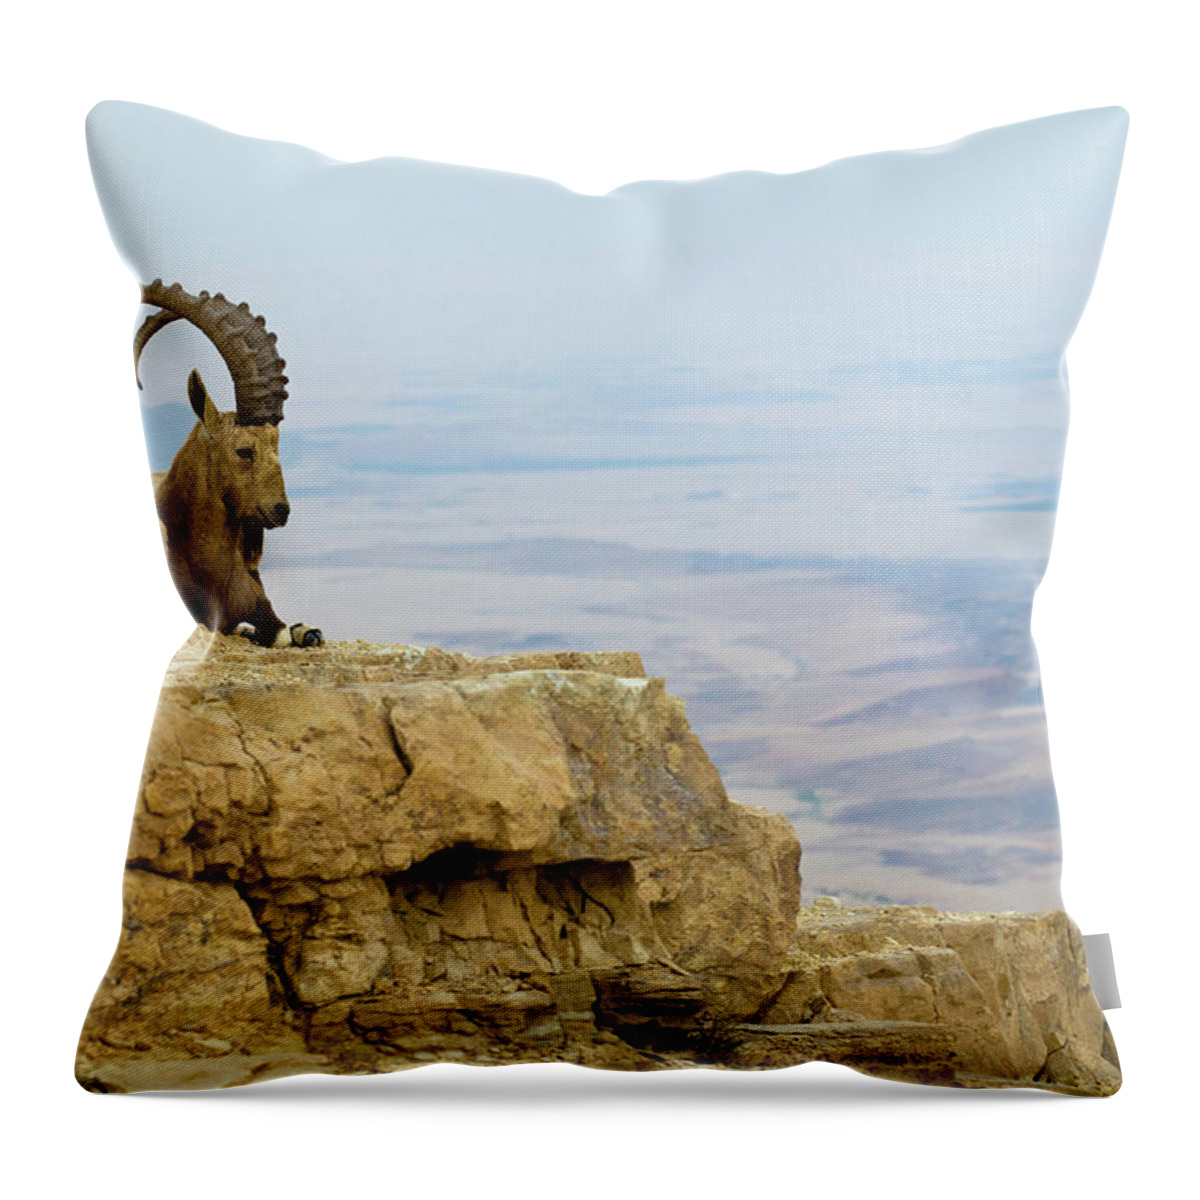 Horned Throw Pillow featuring the photograph Ibex On Ledge by Ilan Shacham